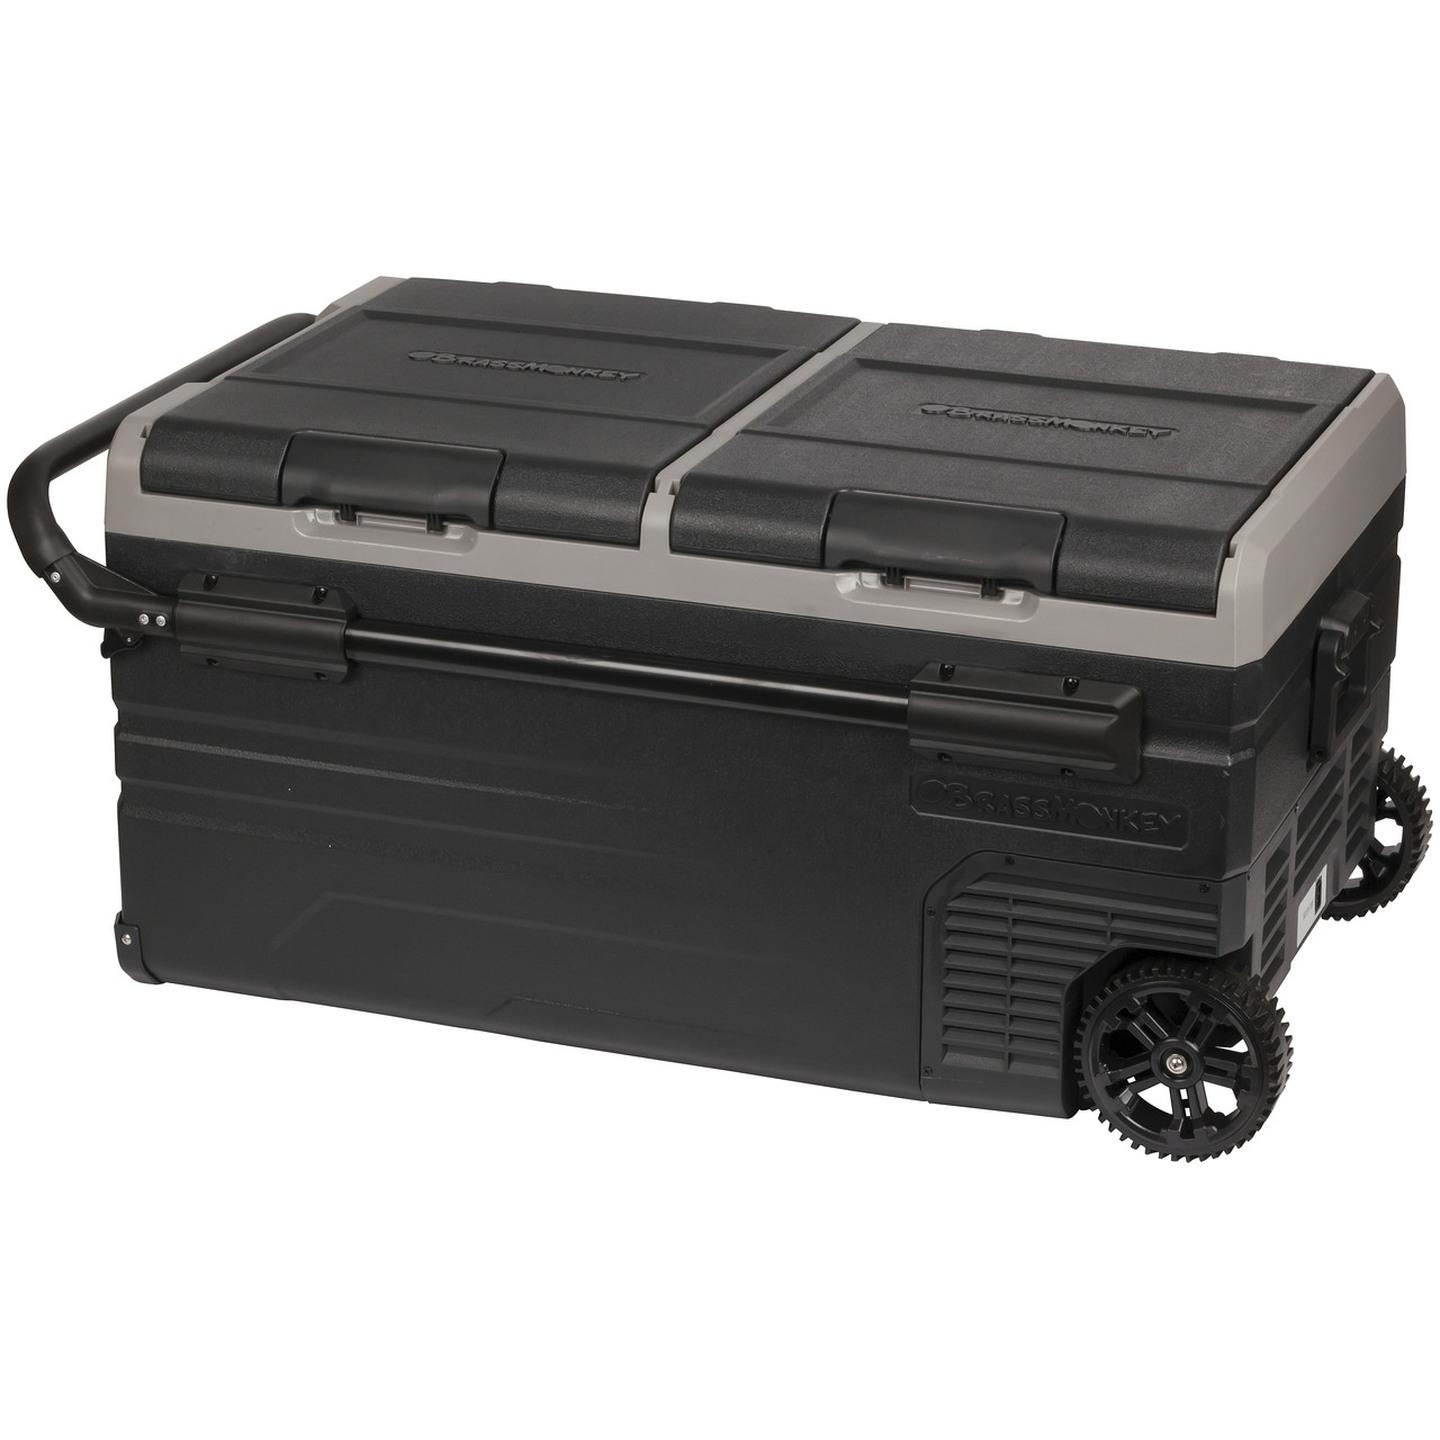 95L Brass Monkey Portable Fridge or Freezer with Handles and Wheels